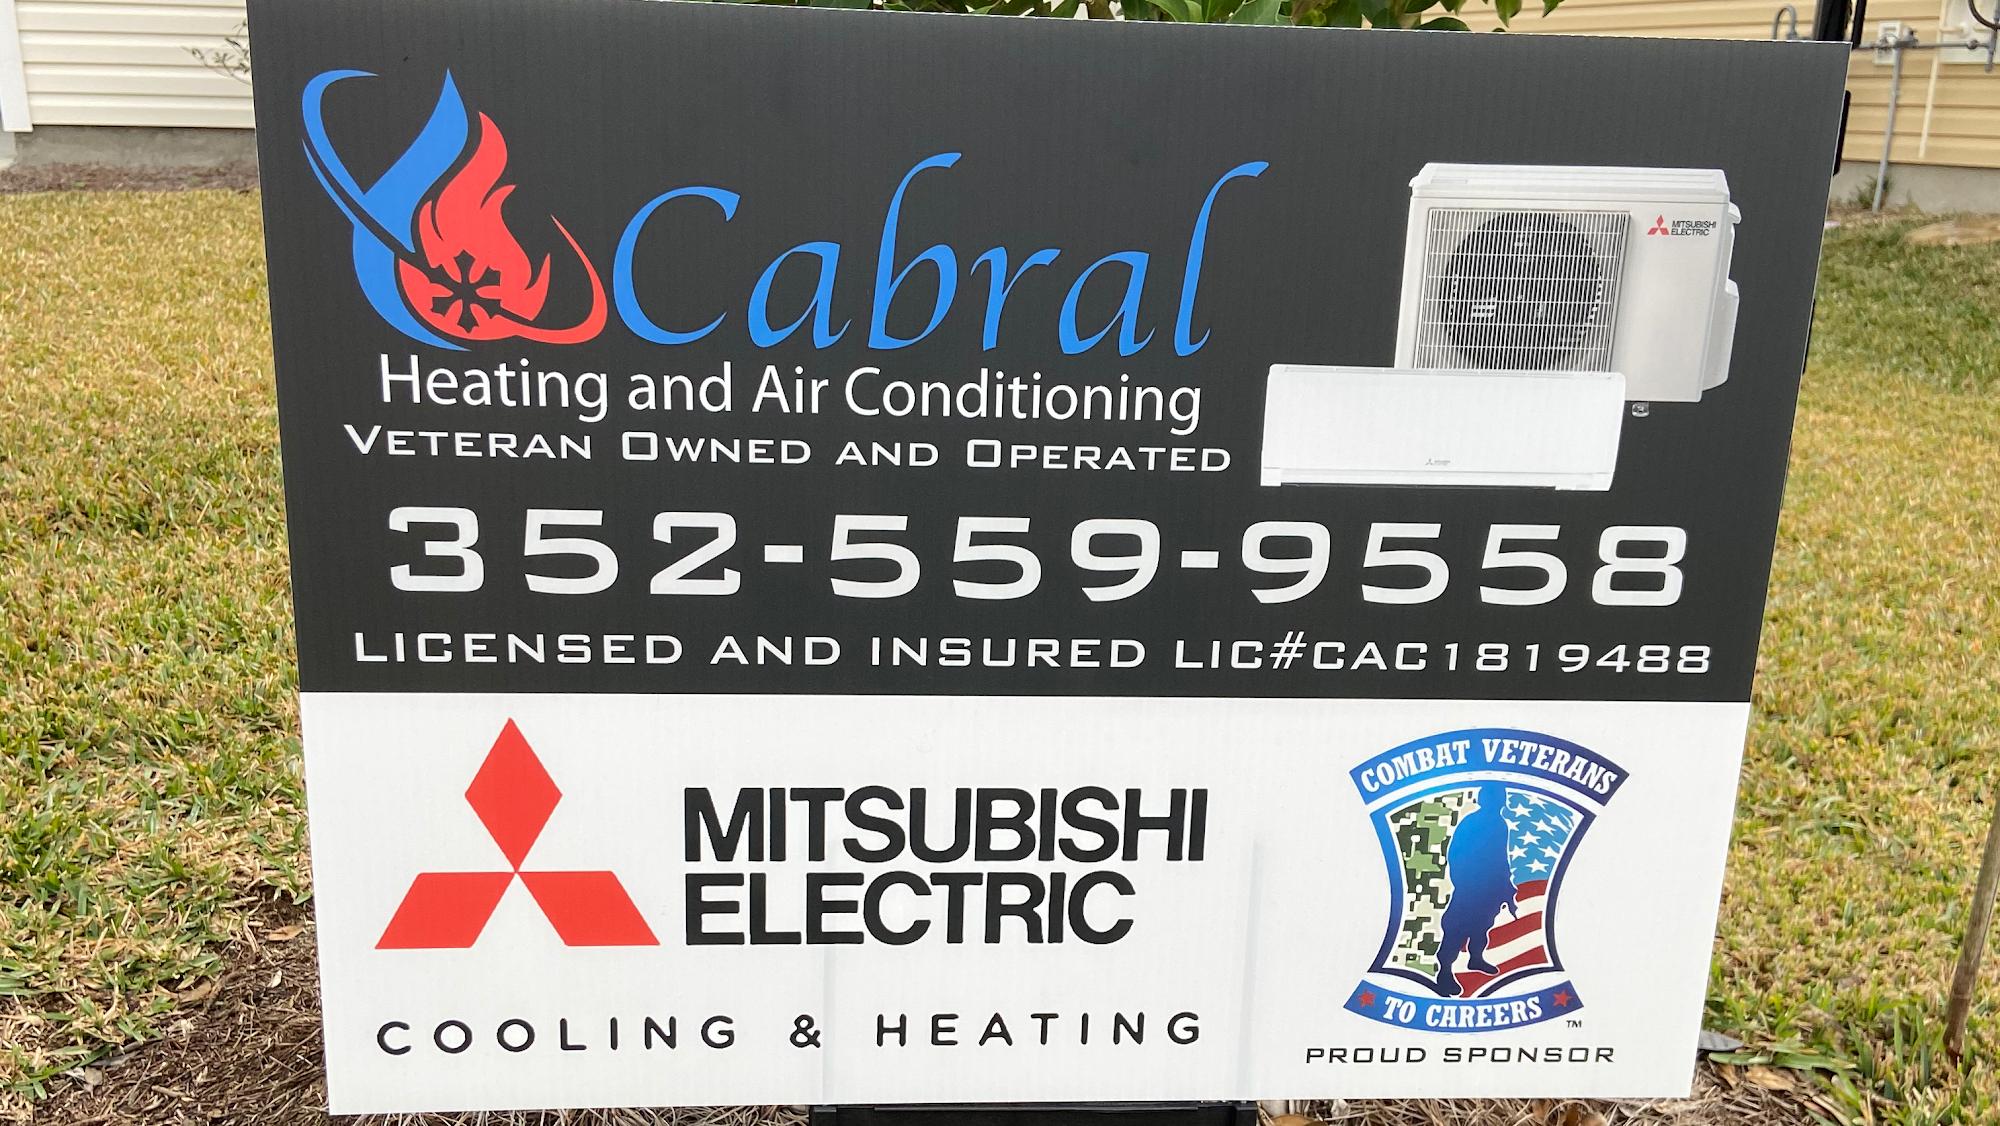 Cabral Heating and Air Conditioning, LLC